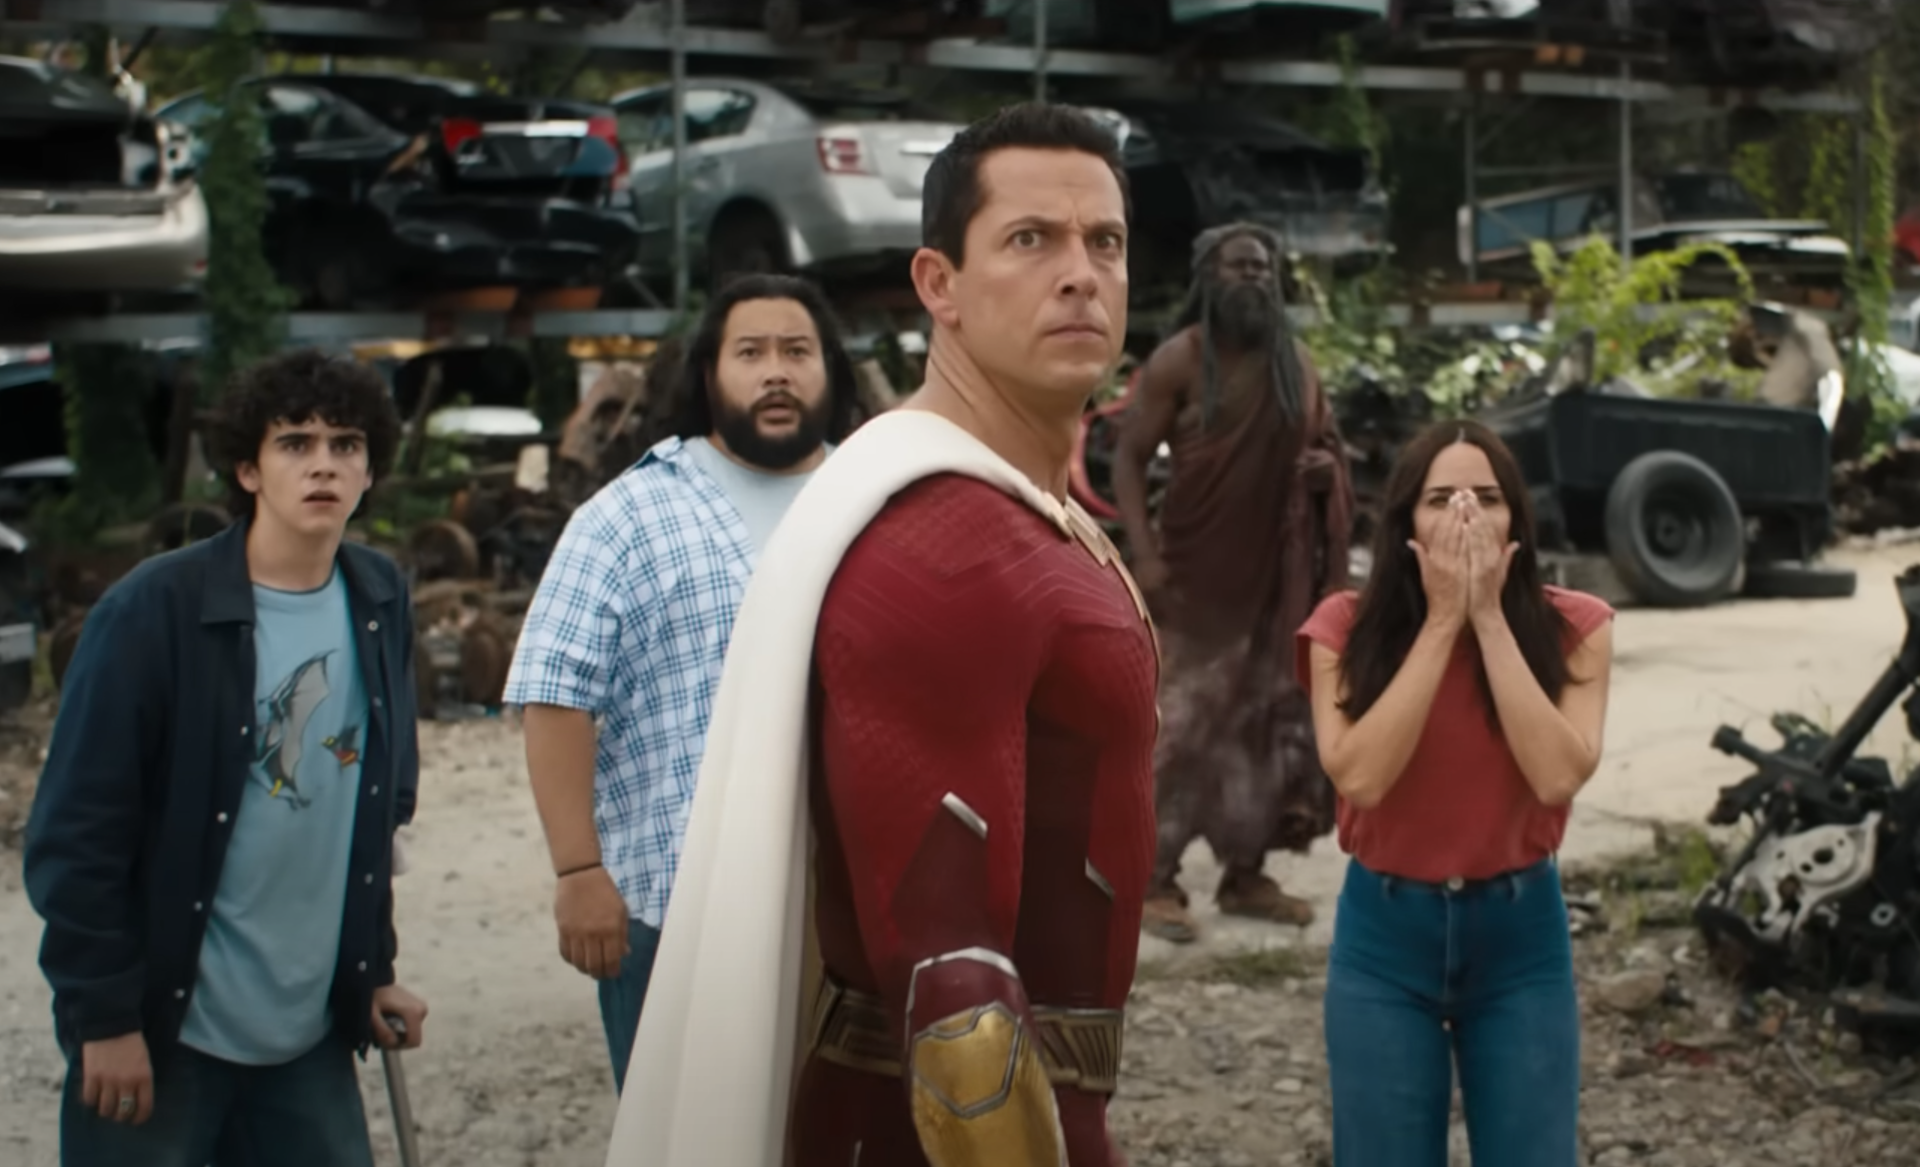 Warner Bros, 'Shazam! Fury of the Gods' trailer and poster is here. The DC movie comes out in theaters on March 17, 2023, and we couldn't be more excited.